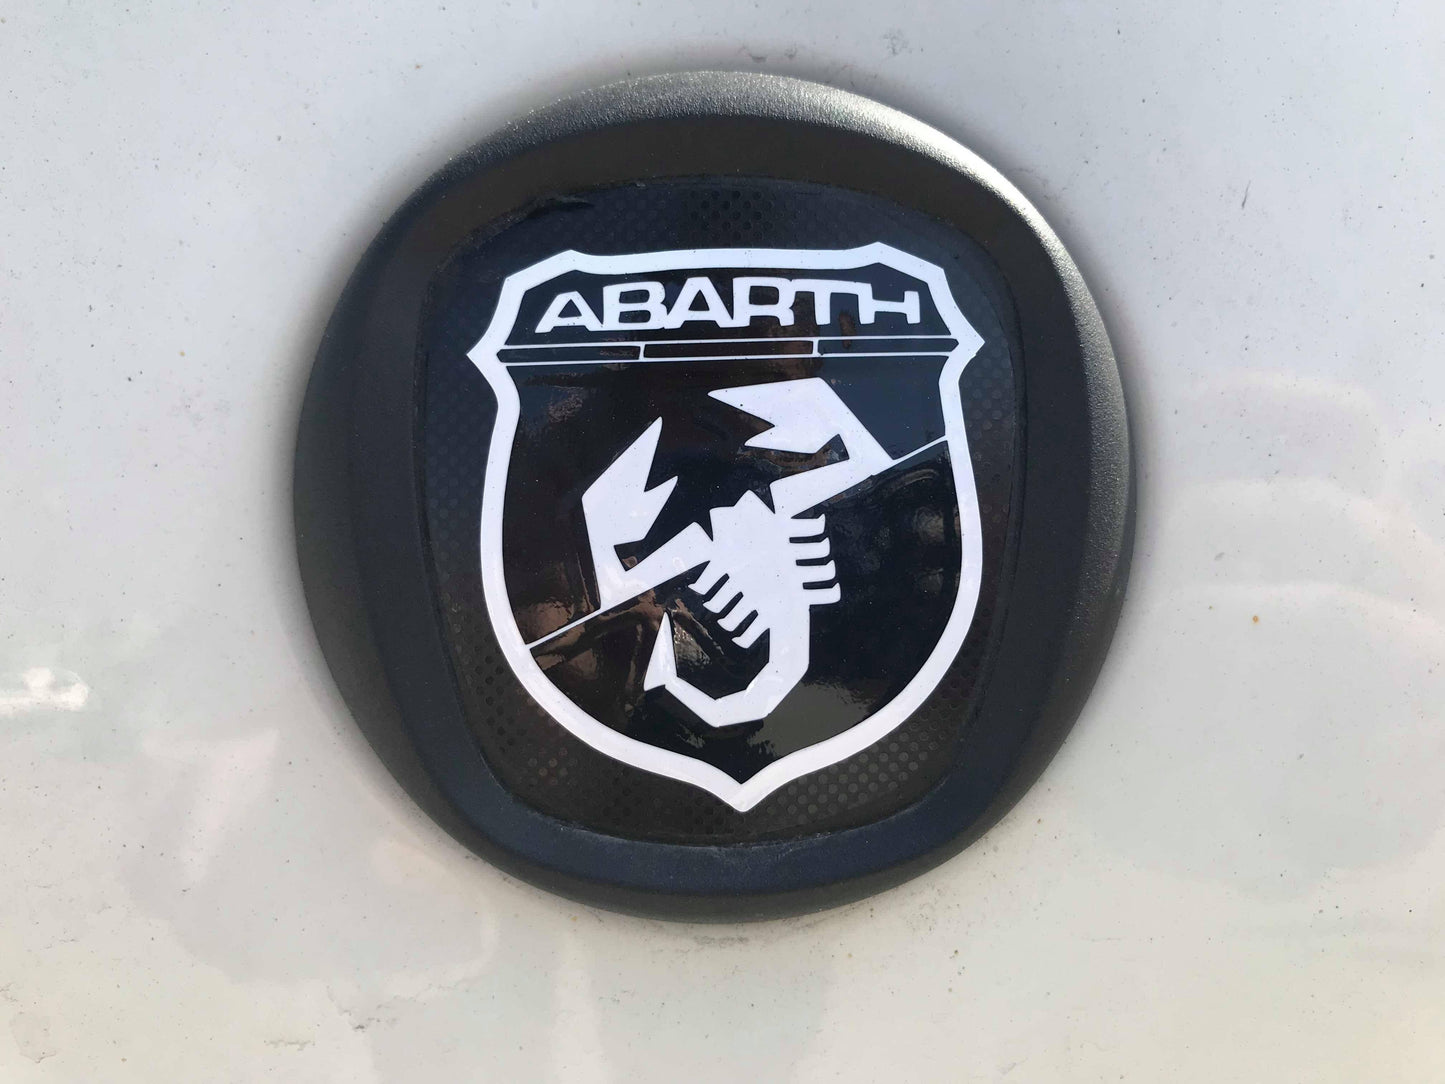 Abarth Grande Punto Badge decals set of four including side badges - Abarth Tuning